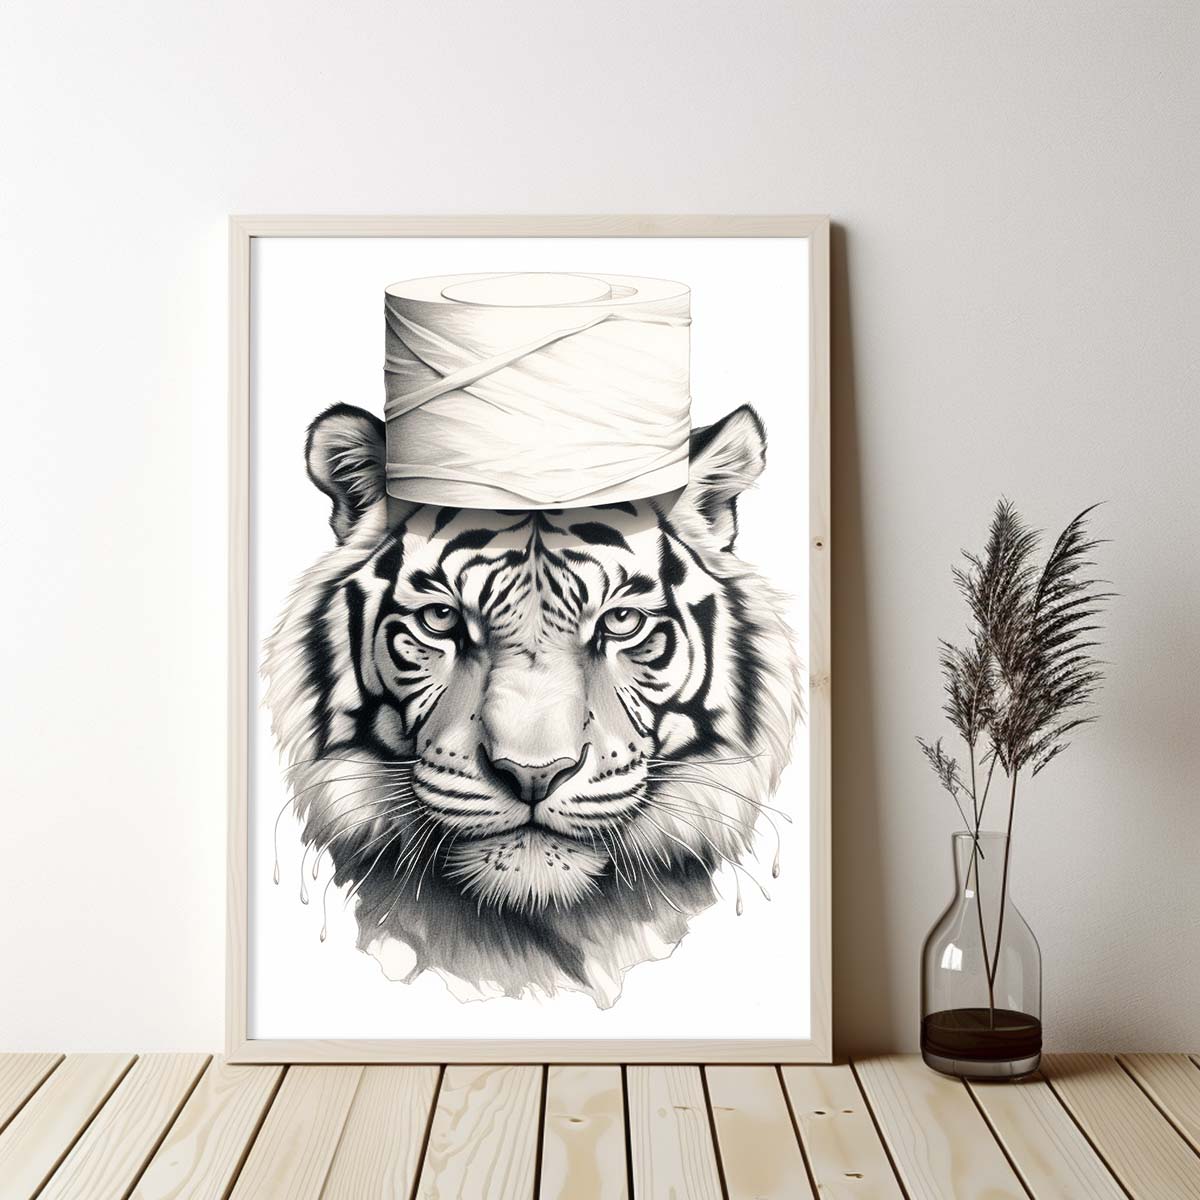 Cute Tiger With Toilet Paper, Canvas Or Poster, Funny Tiger Art, Bathroom Wall Decor, Home Decor, Bathroom Wall Art, Tiger Wall Decor, Animal Decor, Animal Gift, Animal Illustration, Digital Download